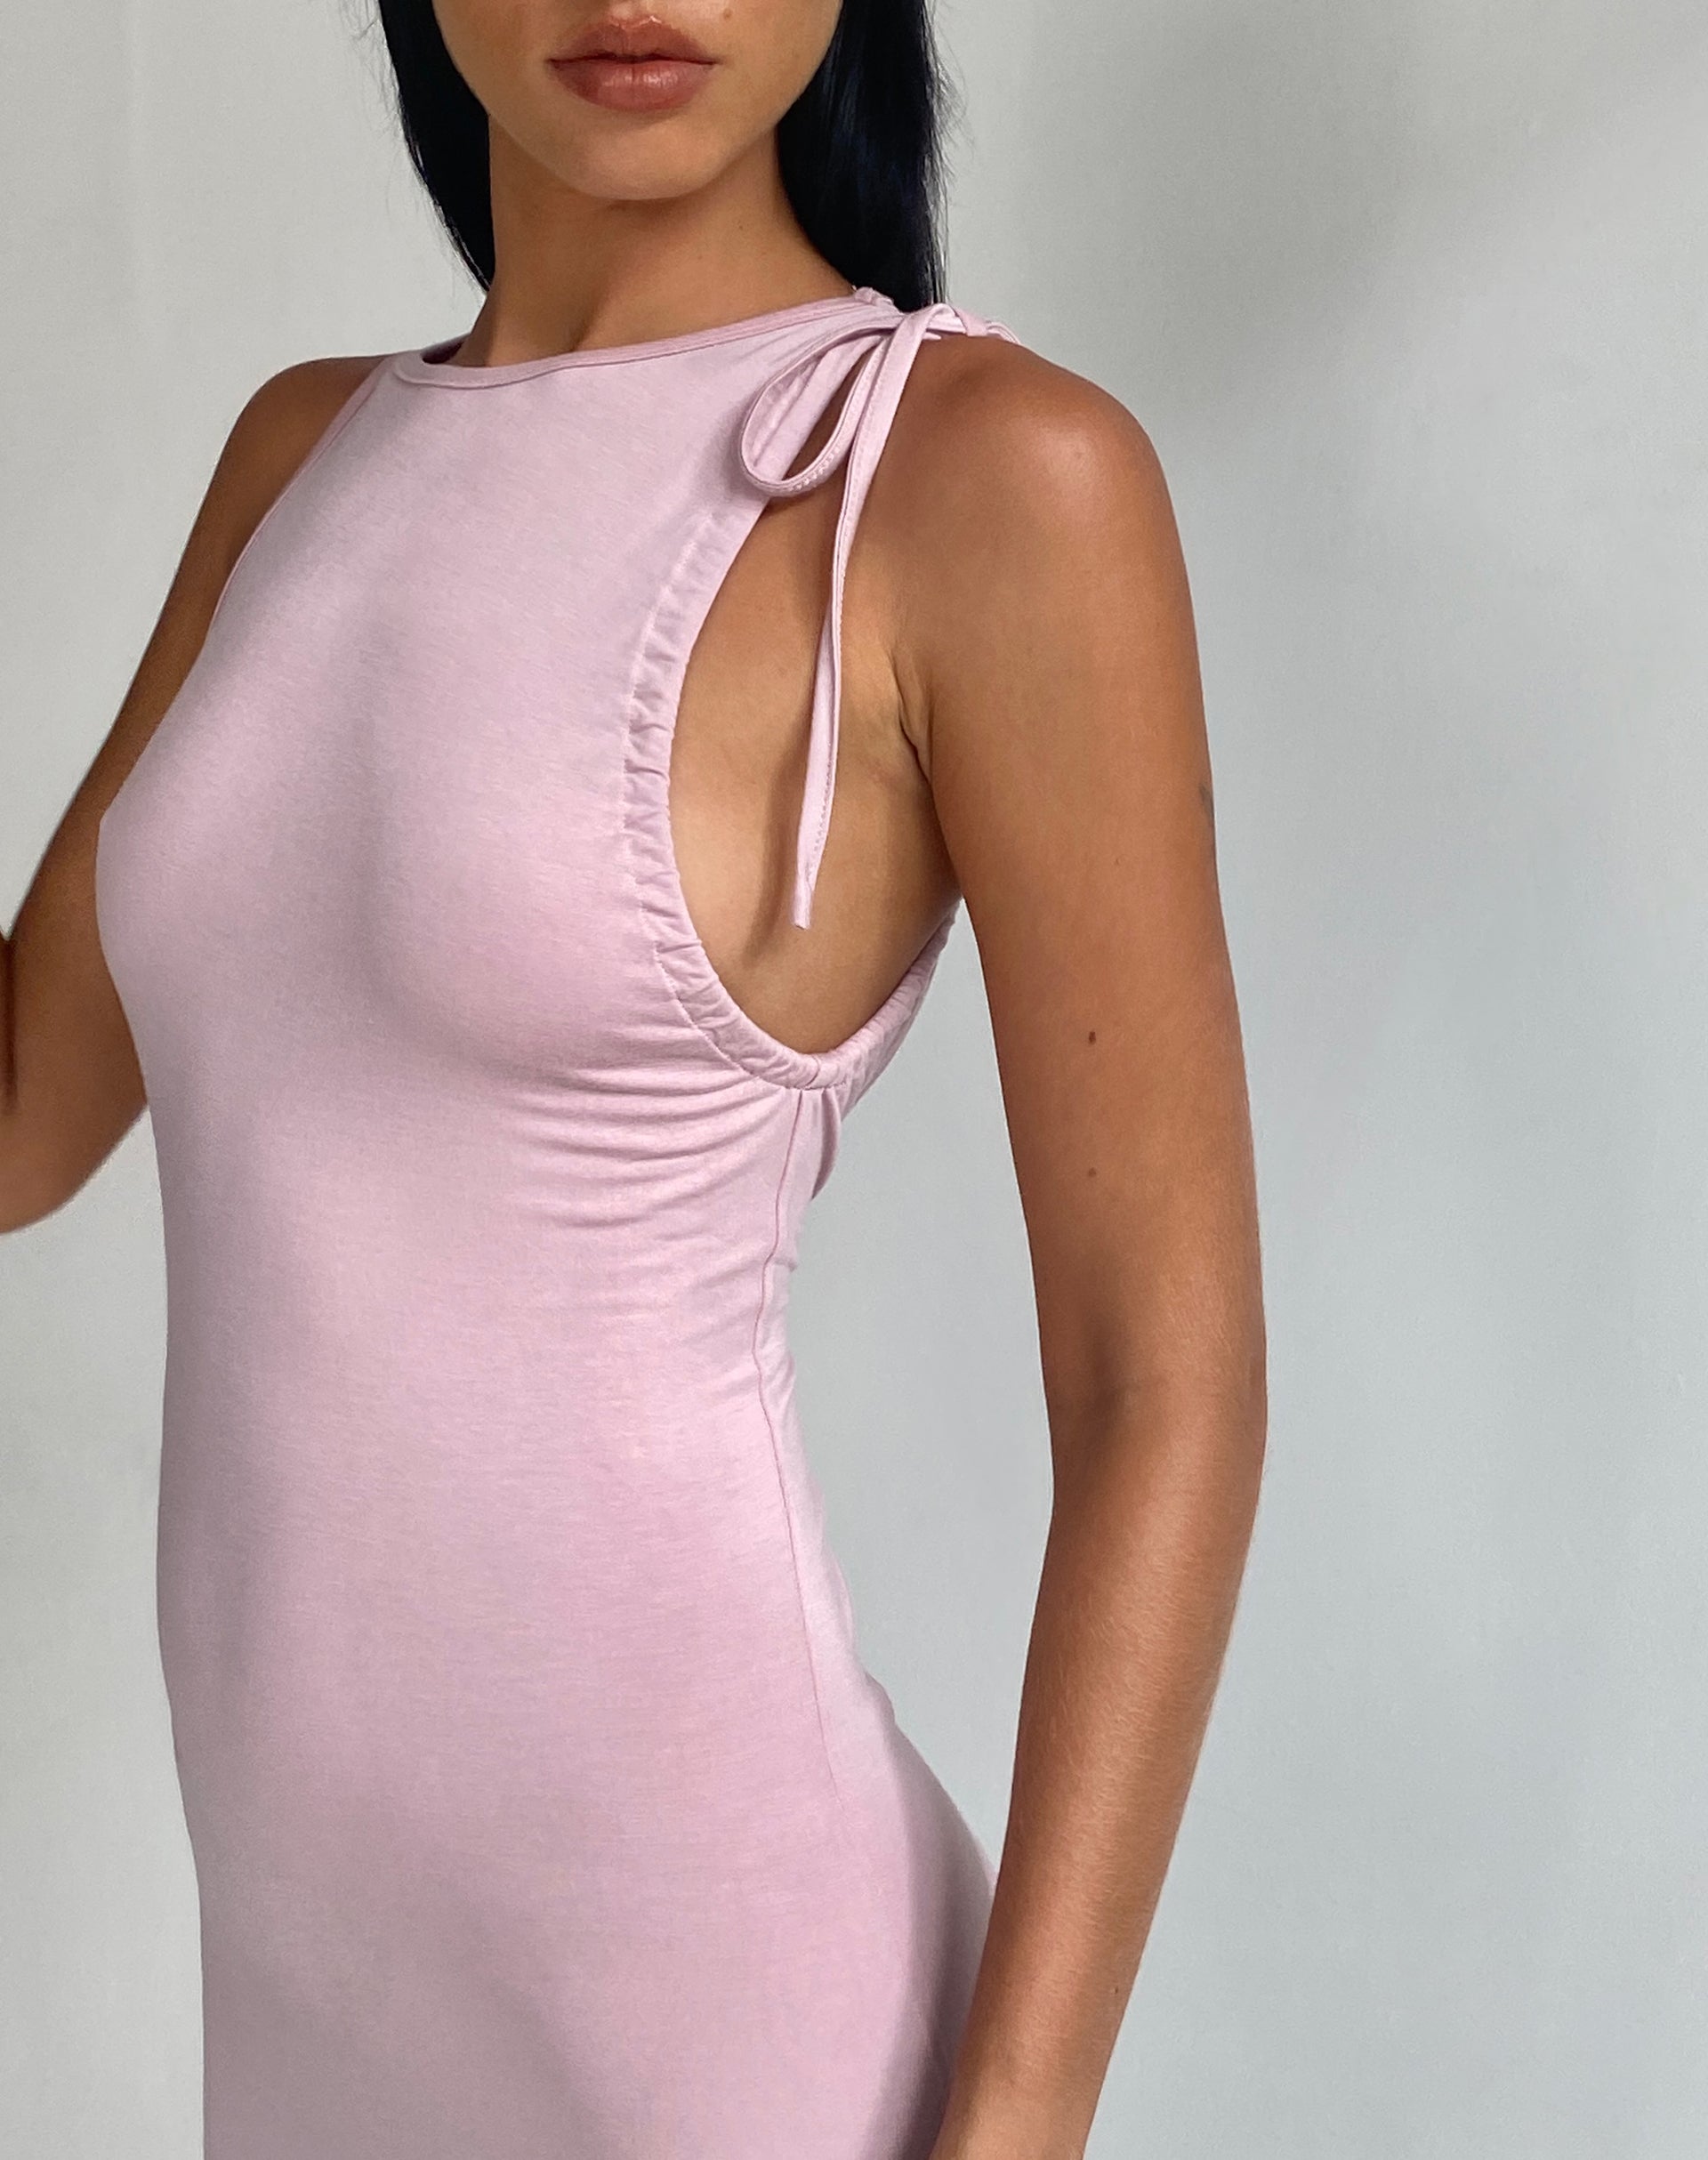 image of Elinor Maxi Dress in Slinky Baby Pink